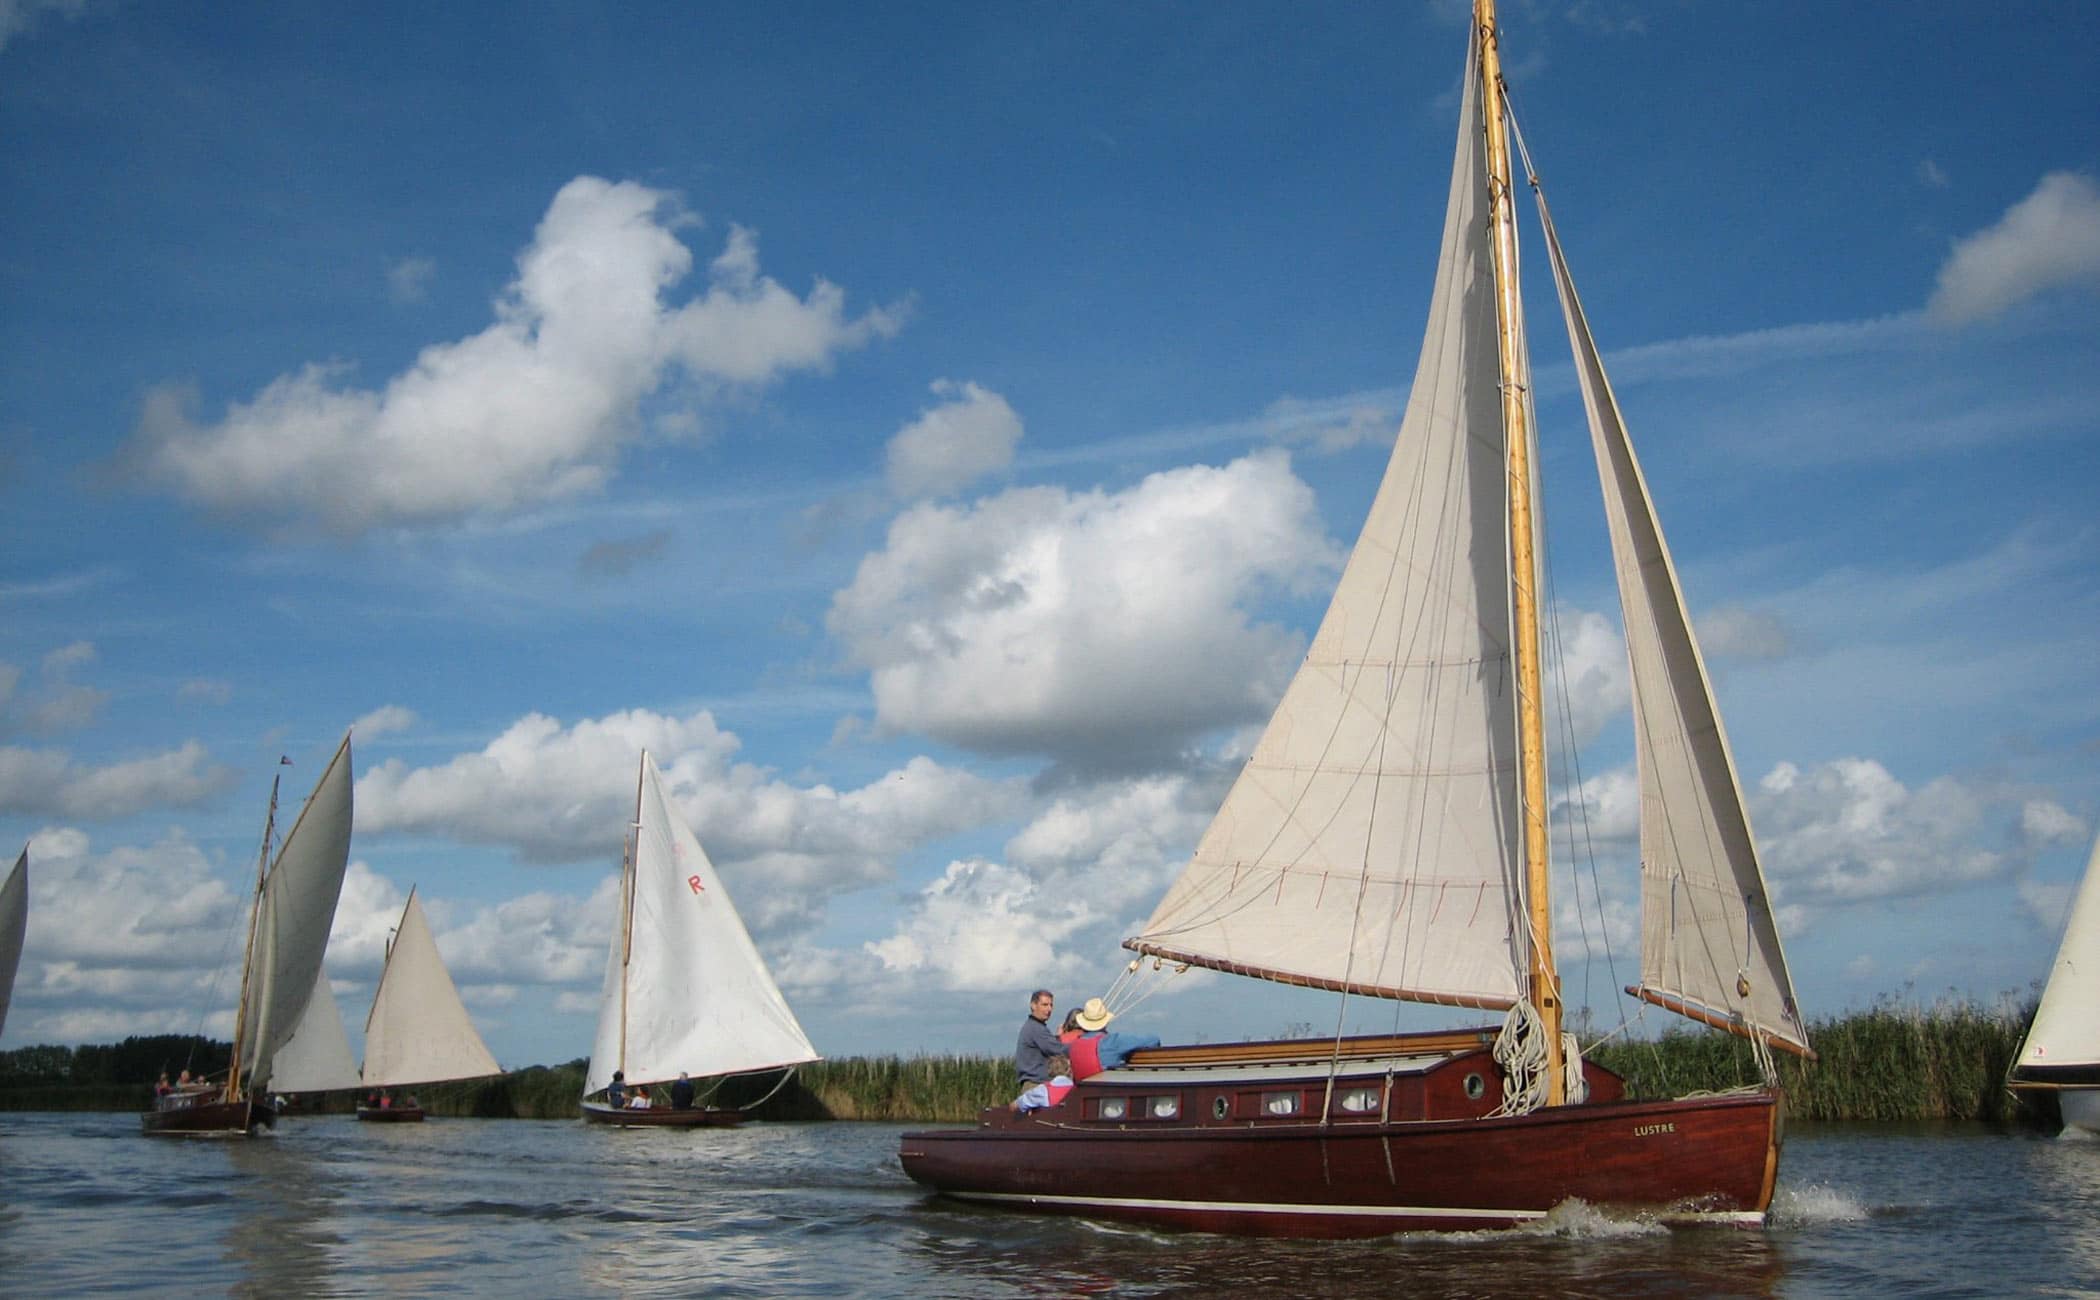 The Lullaby class Lucent a traditional wooden sailing cabin yacht on the Norfolk Broads.